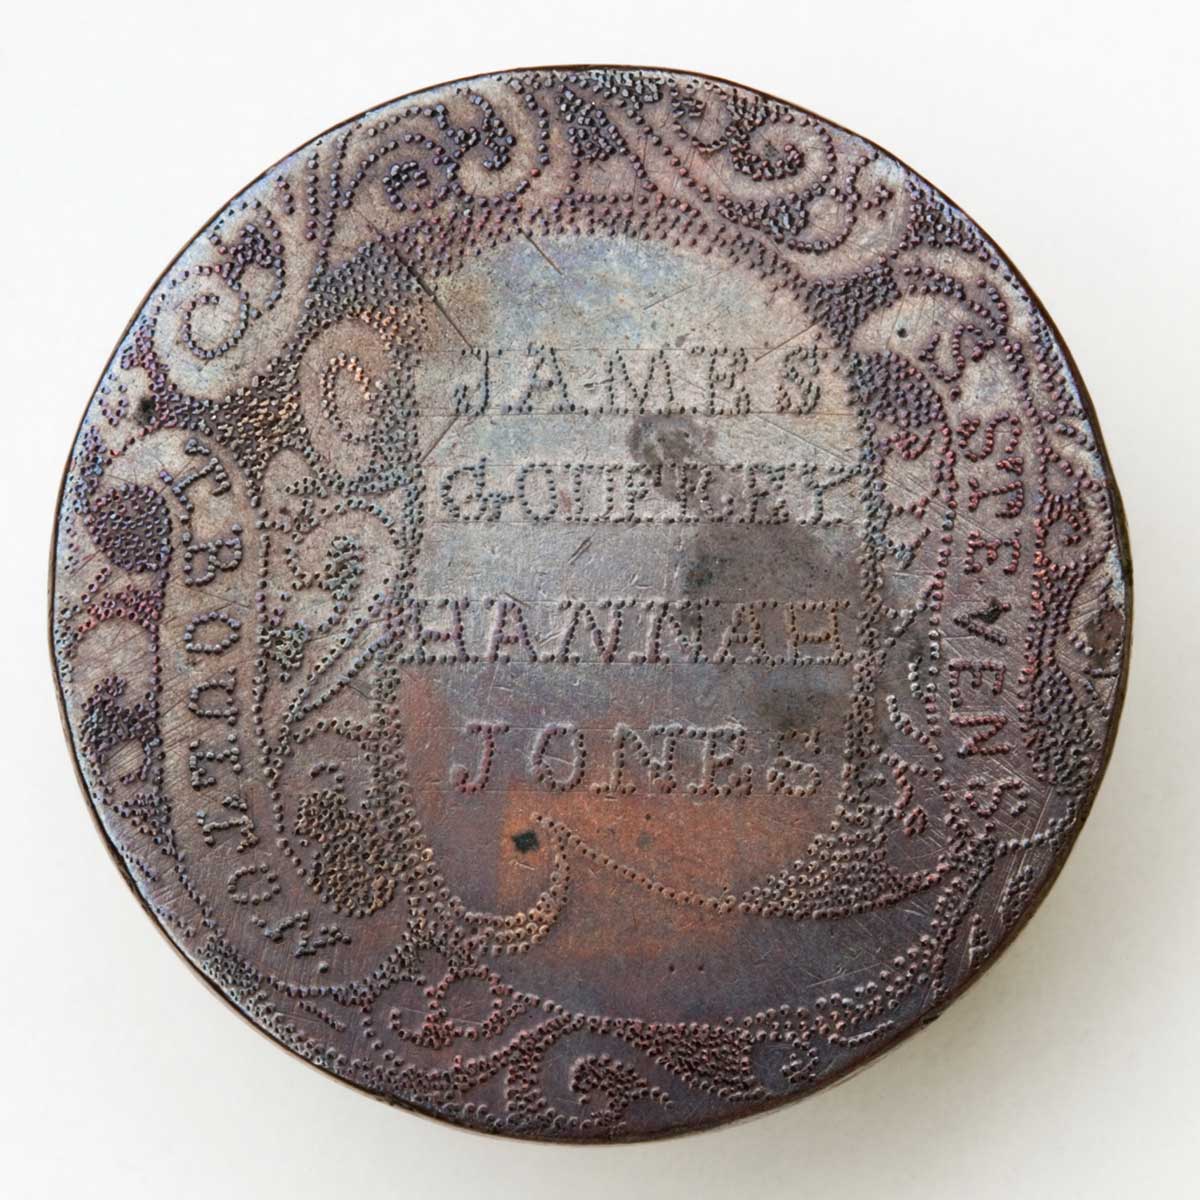 Token engraved with an elaborate swirling stippled design and a scroll shape containing stippled text. To the left and right of the main text are the names: T. BOULTON. S. STEVENS. Within the scroll are the names: JAMES GODFREY HANNAH JONES. - click to view larger image